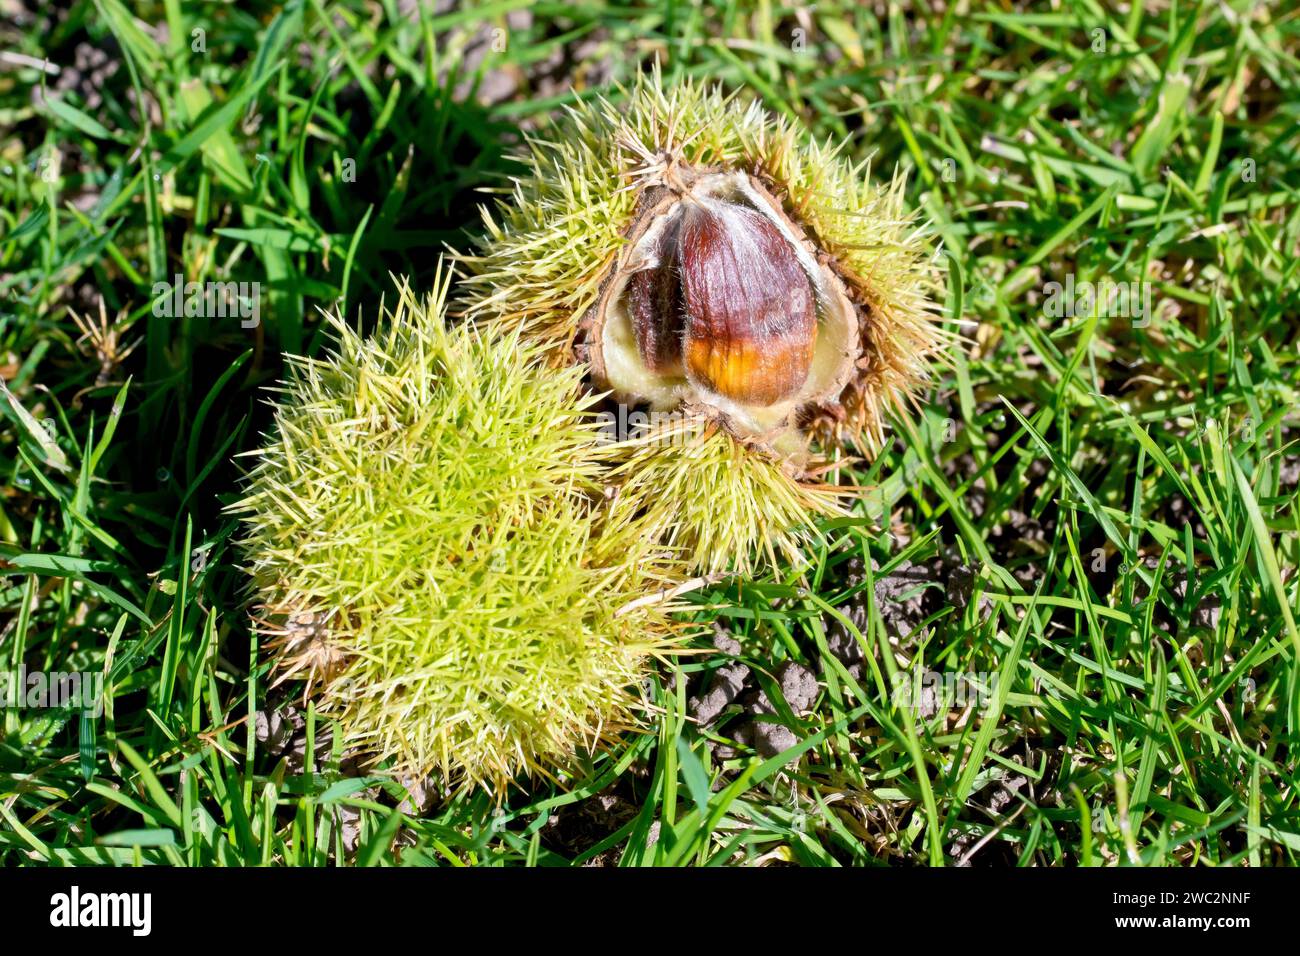 Sweet Chestnut or Spanish Chestnut (castanea sativa), close up of the spiky fruits laying on the grass beneath a tree, opening in the autumn sunshine. Stock Photo